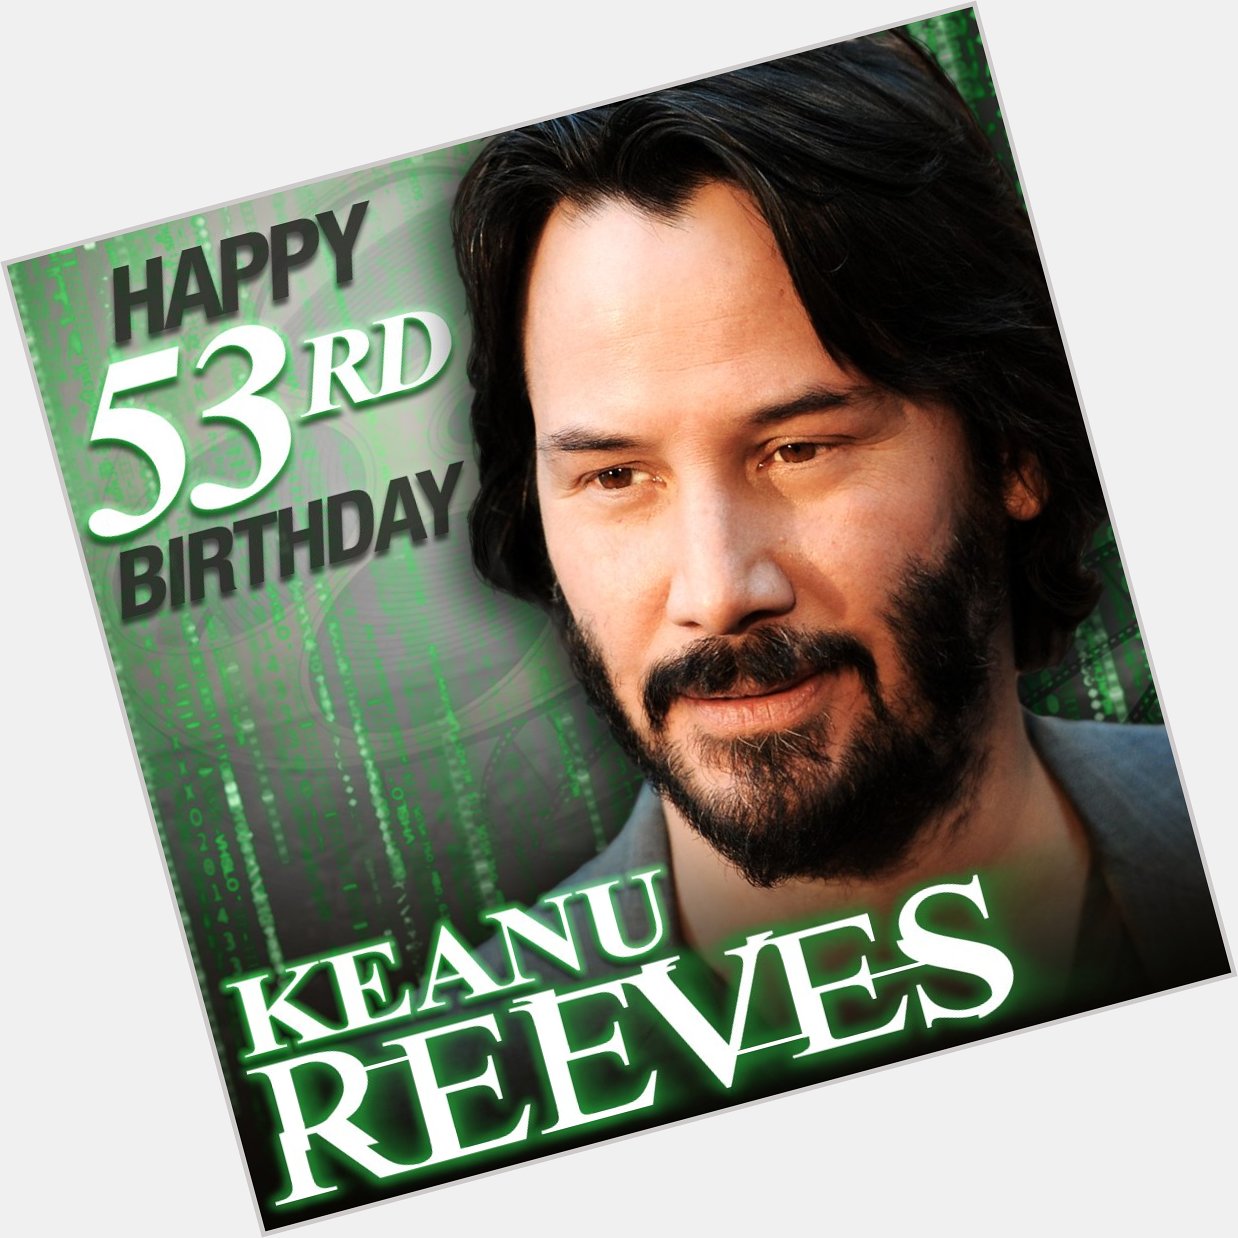 Happy Birthday to Keanu Reeves who turns 53 today! 